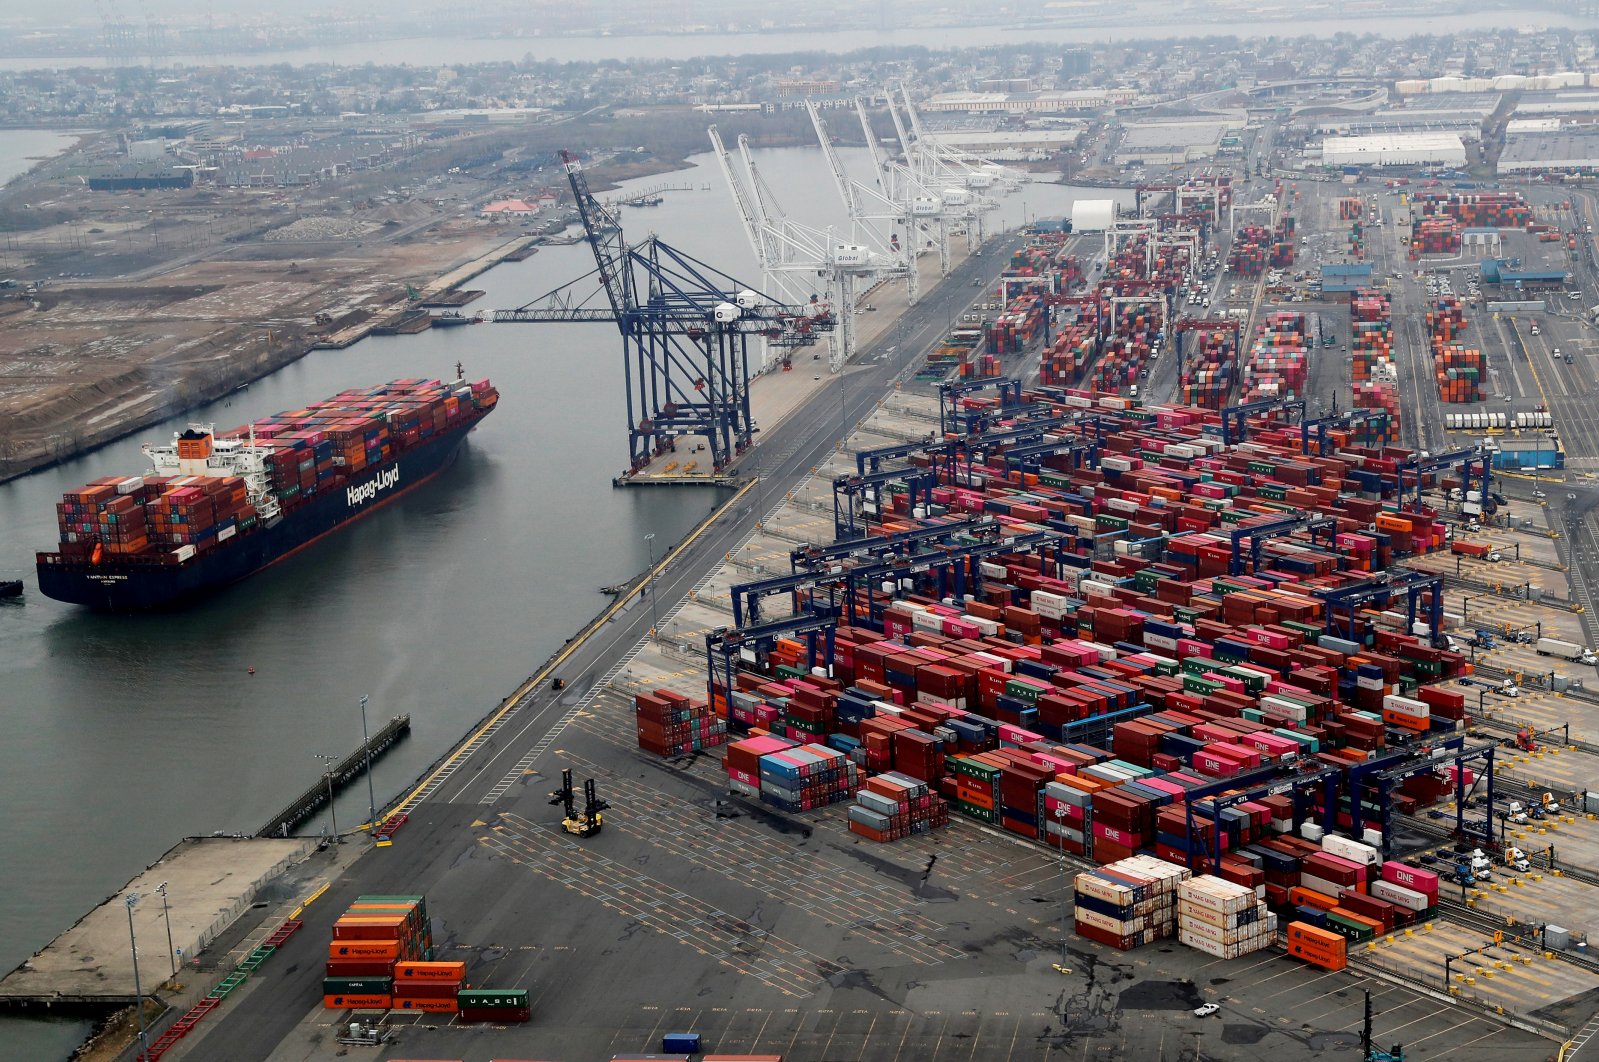 A container ship floats near hundreds of shipping containers stacked at a pier at the Port of New York and New Jersey in Elizabeth, New Jersey, U.S., March 30, 2020. (Reuters Photo)